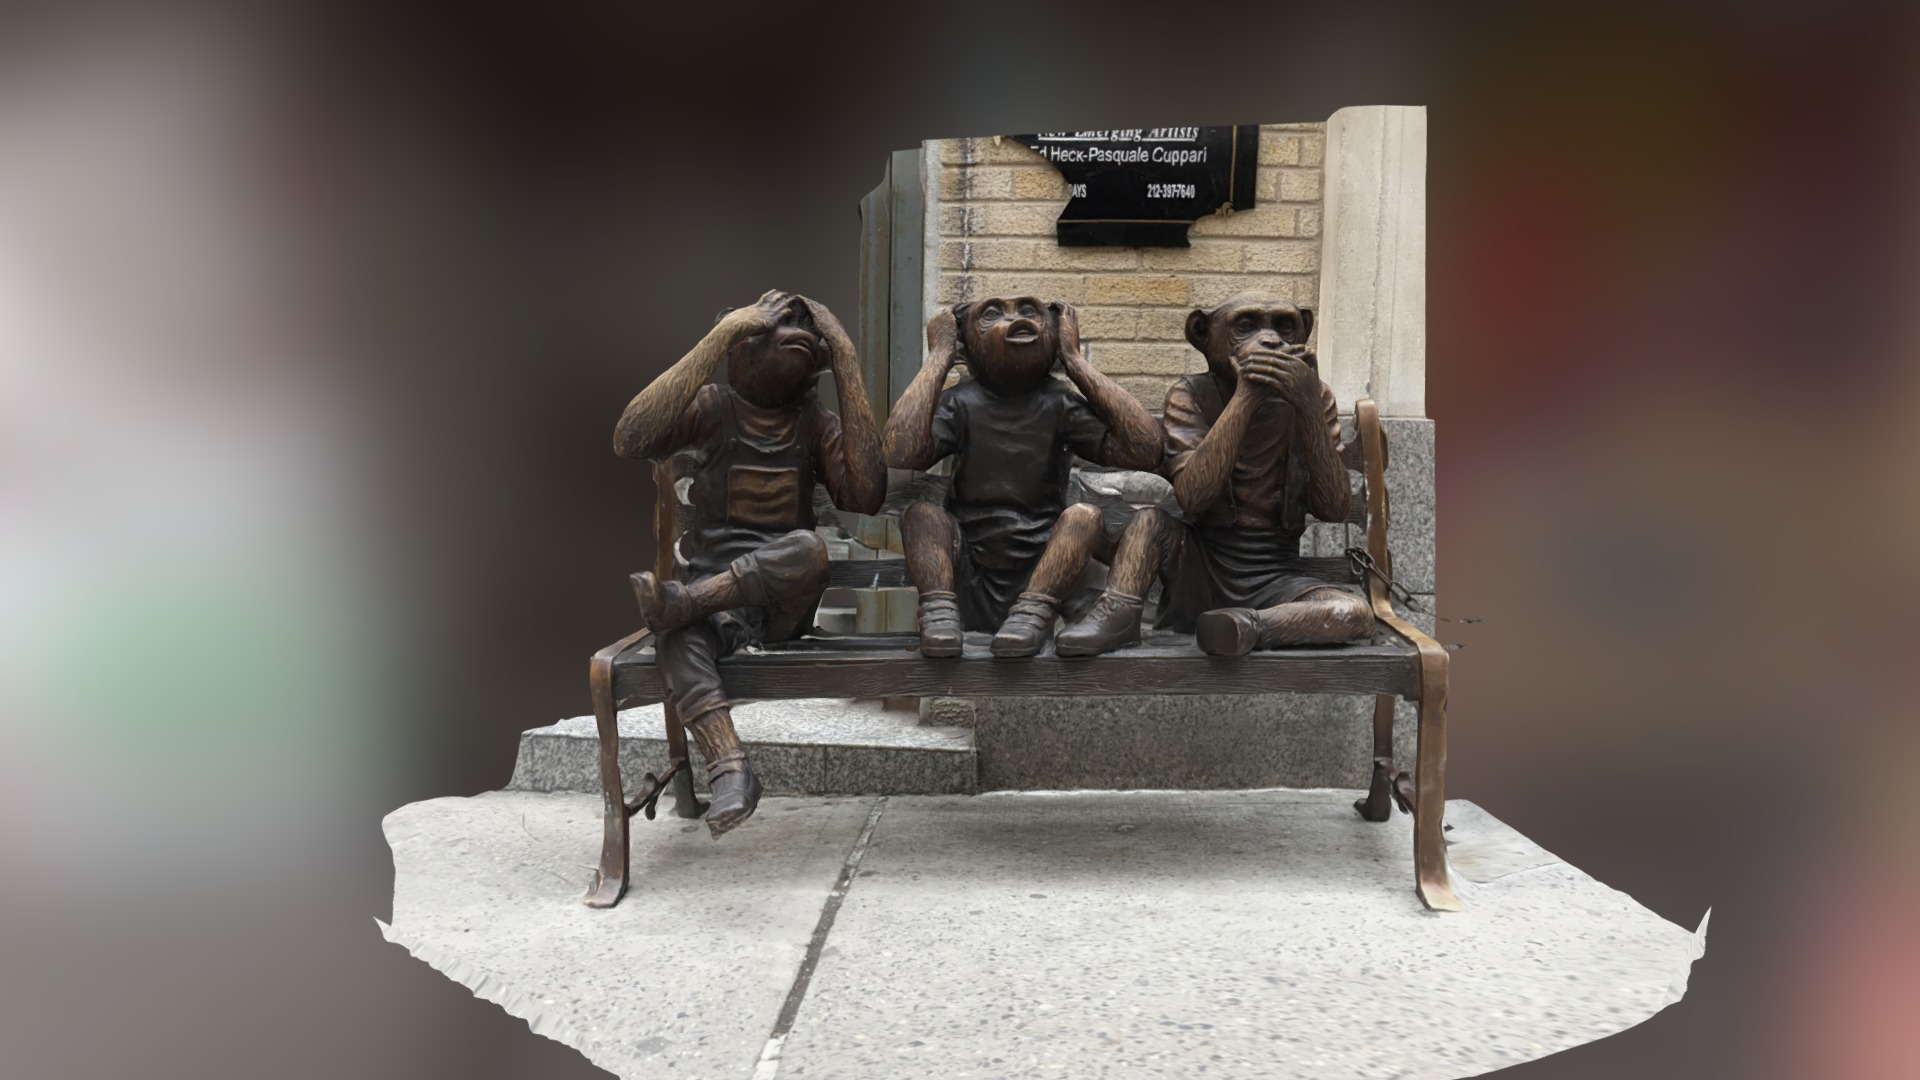 3D model Monkeys chilling - This is a 3D model of the Monkeys chilling. The 3D model is about a group of statues on a bench.